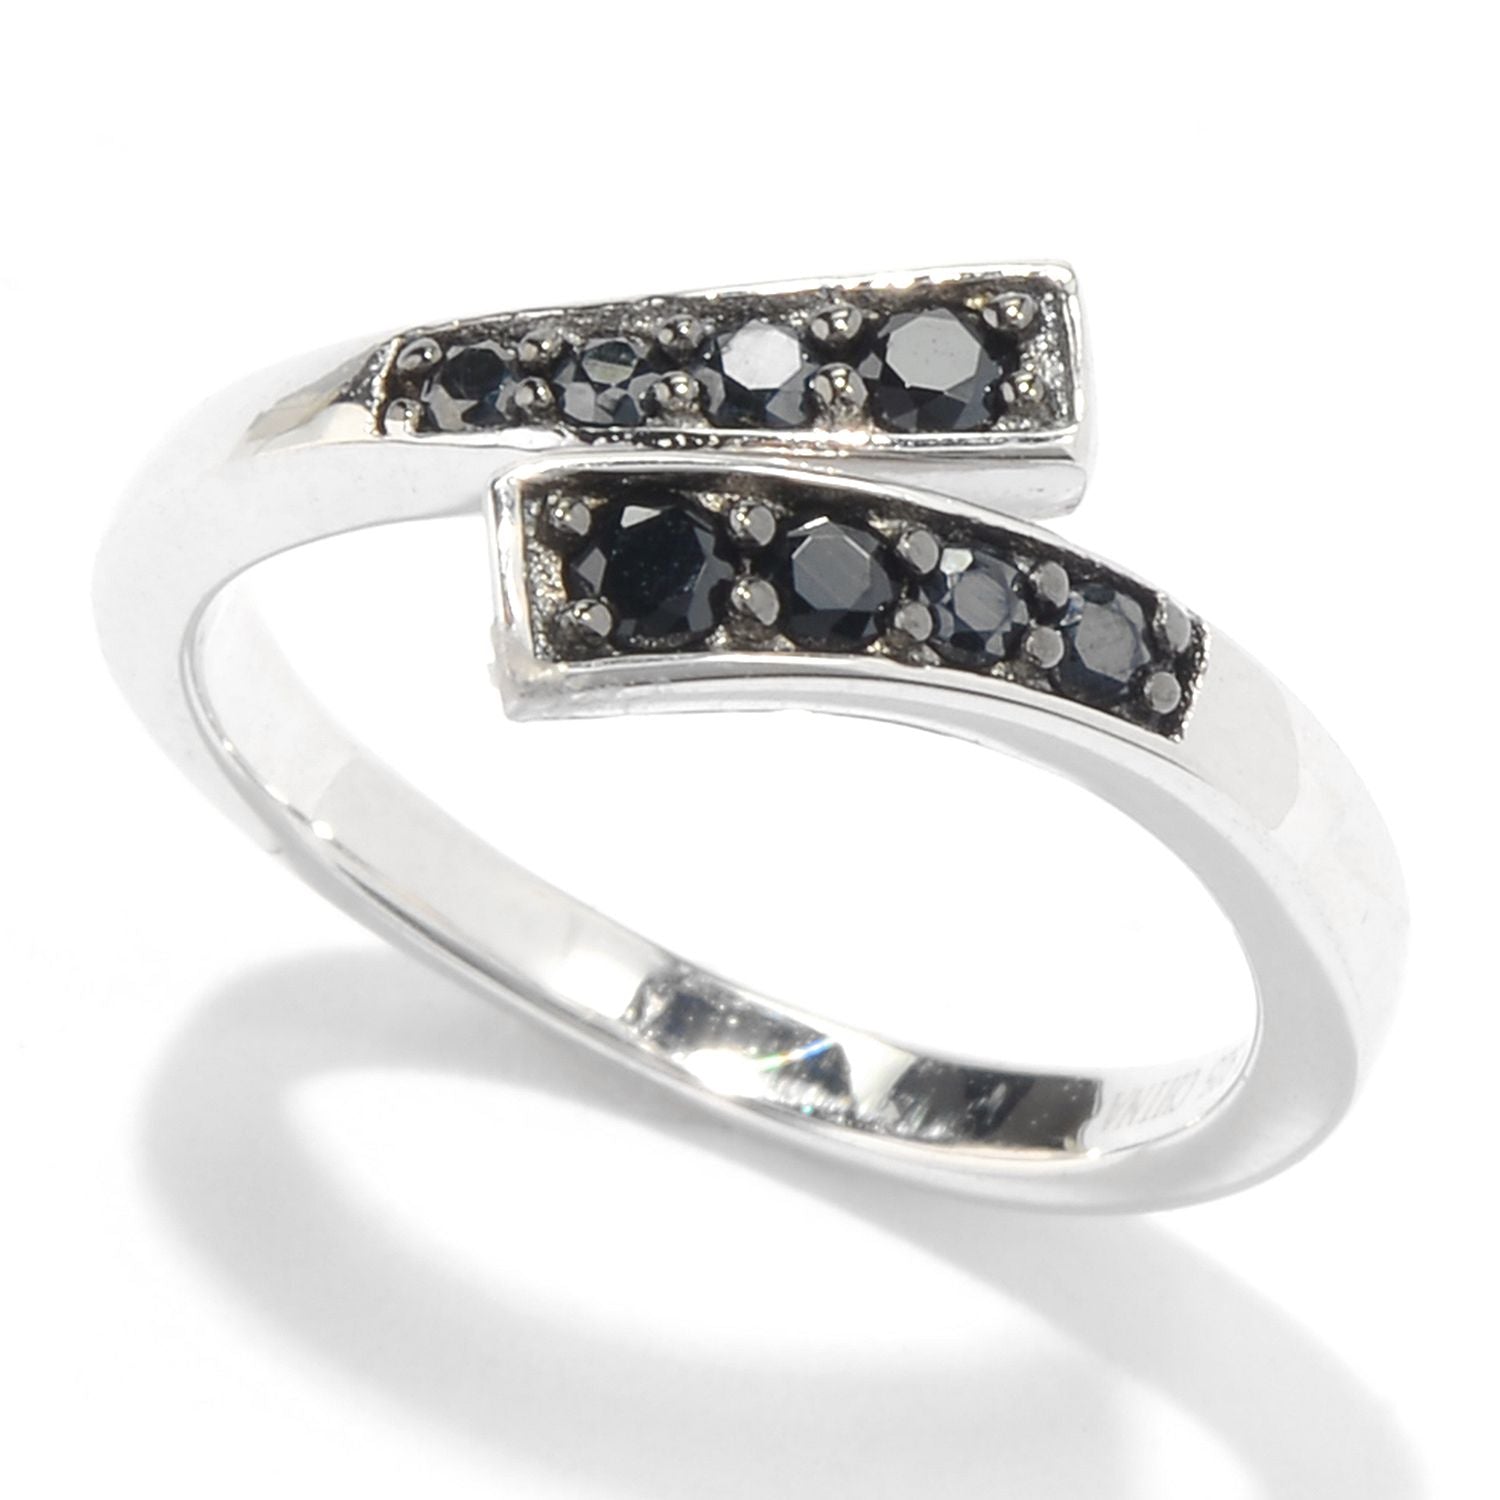 Pinctore Sterling Silver Black Spinel Open Bypass Toe Ring - pinctore